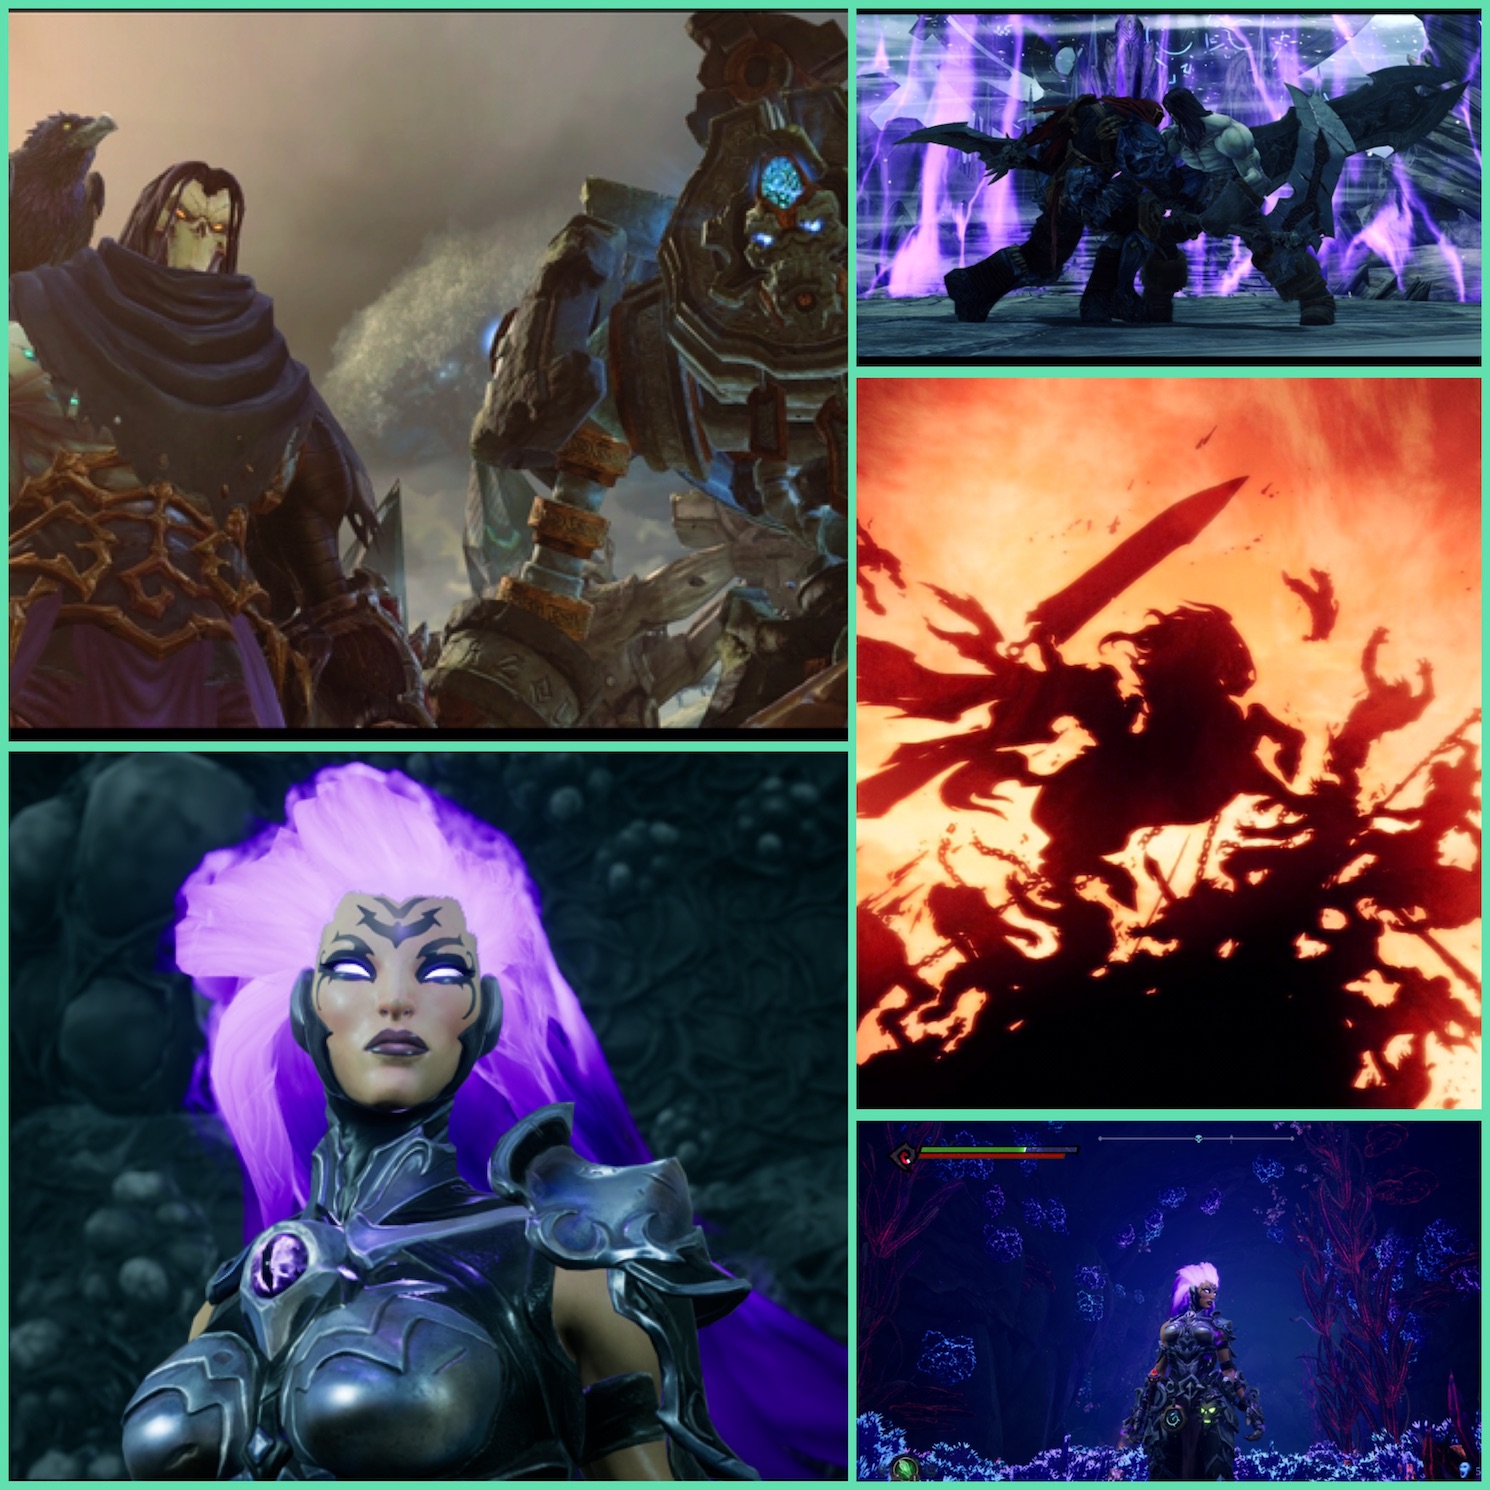 darksiders-1-2-3-franchise-cavalieri-apocalisse-considerazioni-riflessioni-insta-thoughts-gaming